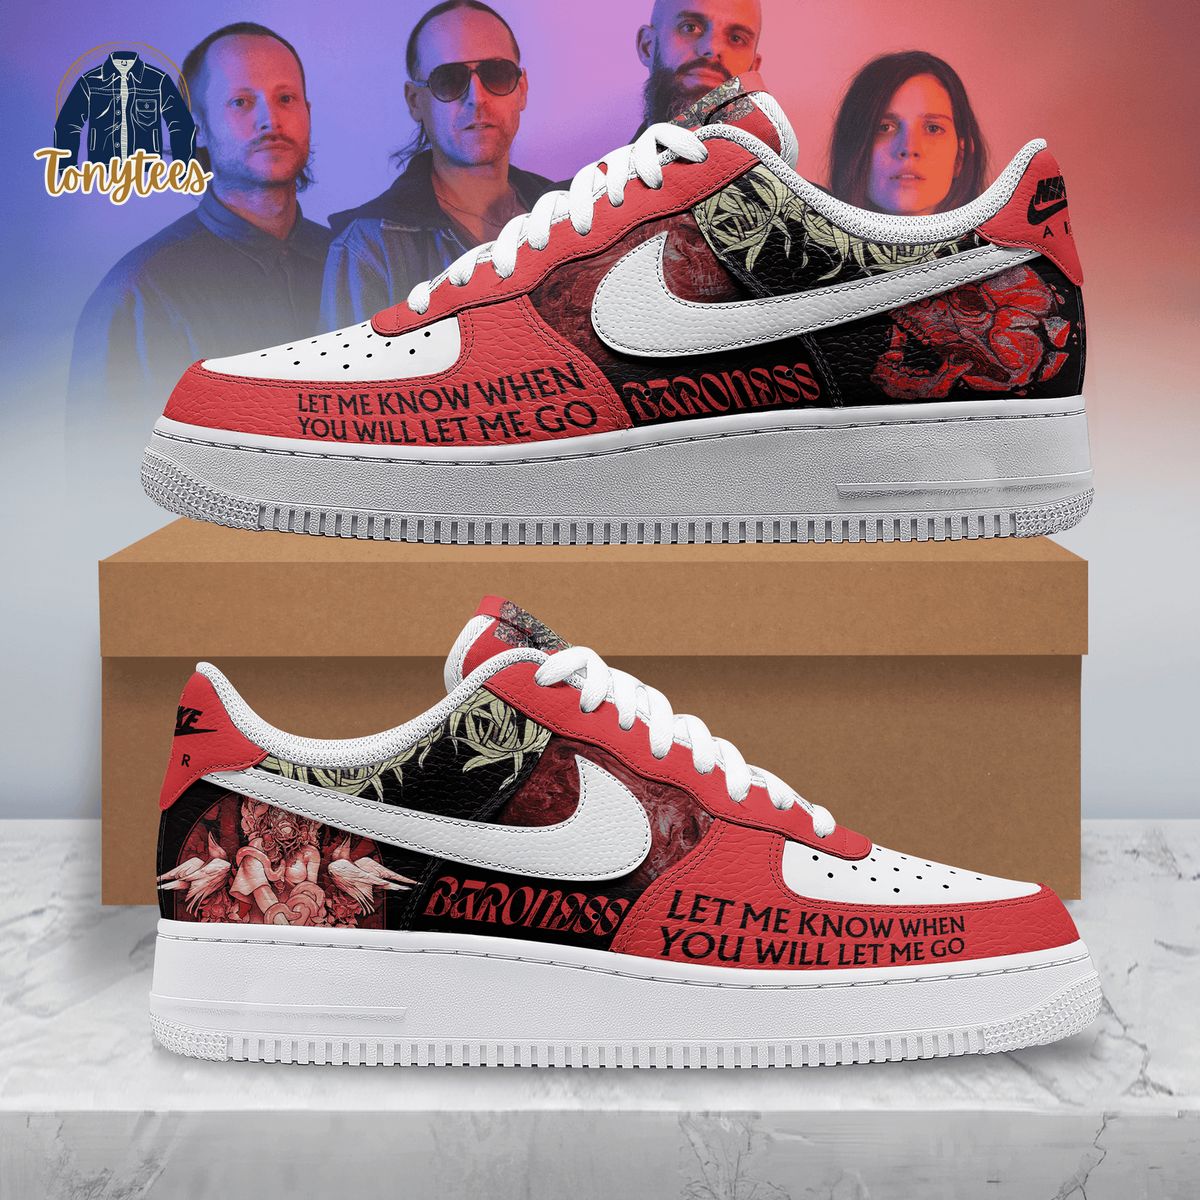 Baroness band air force 1 sneaker